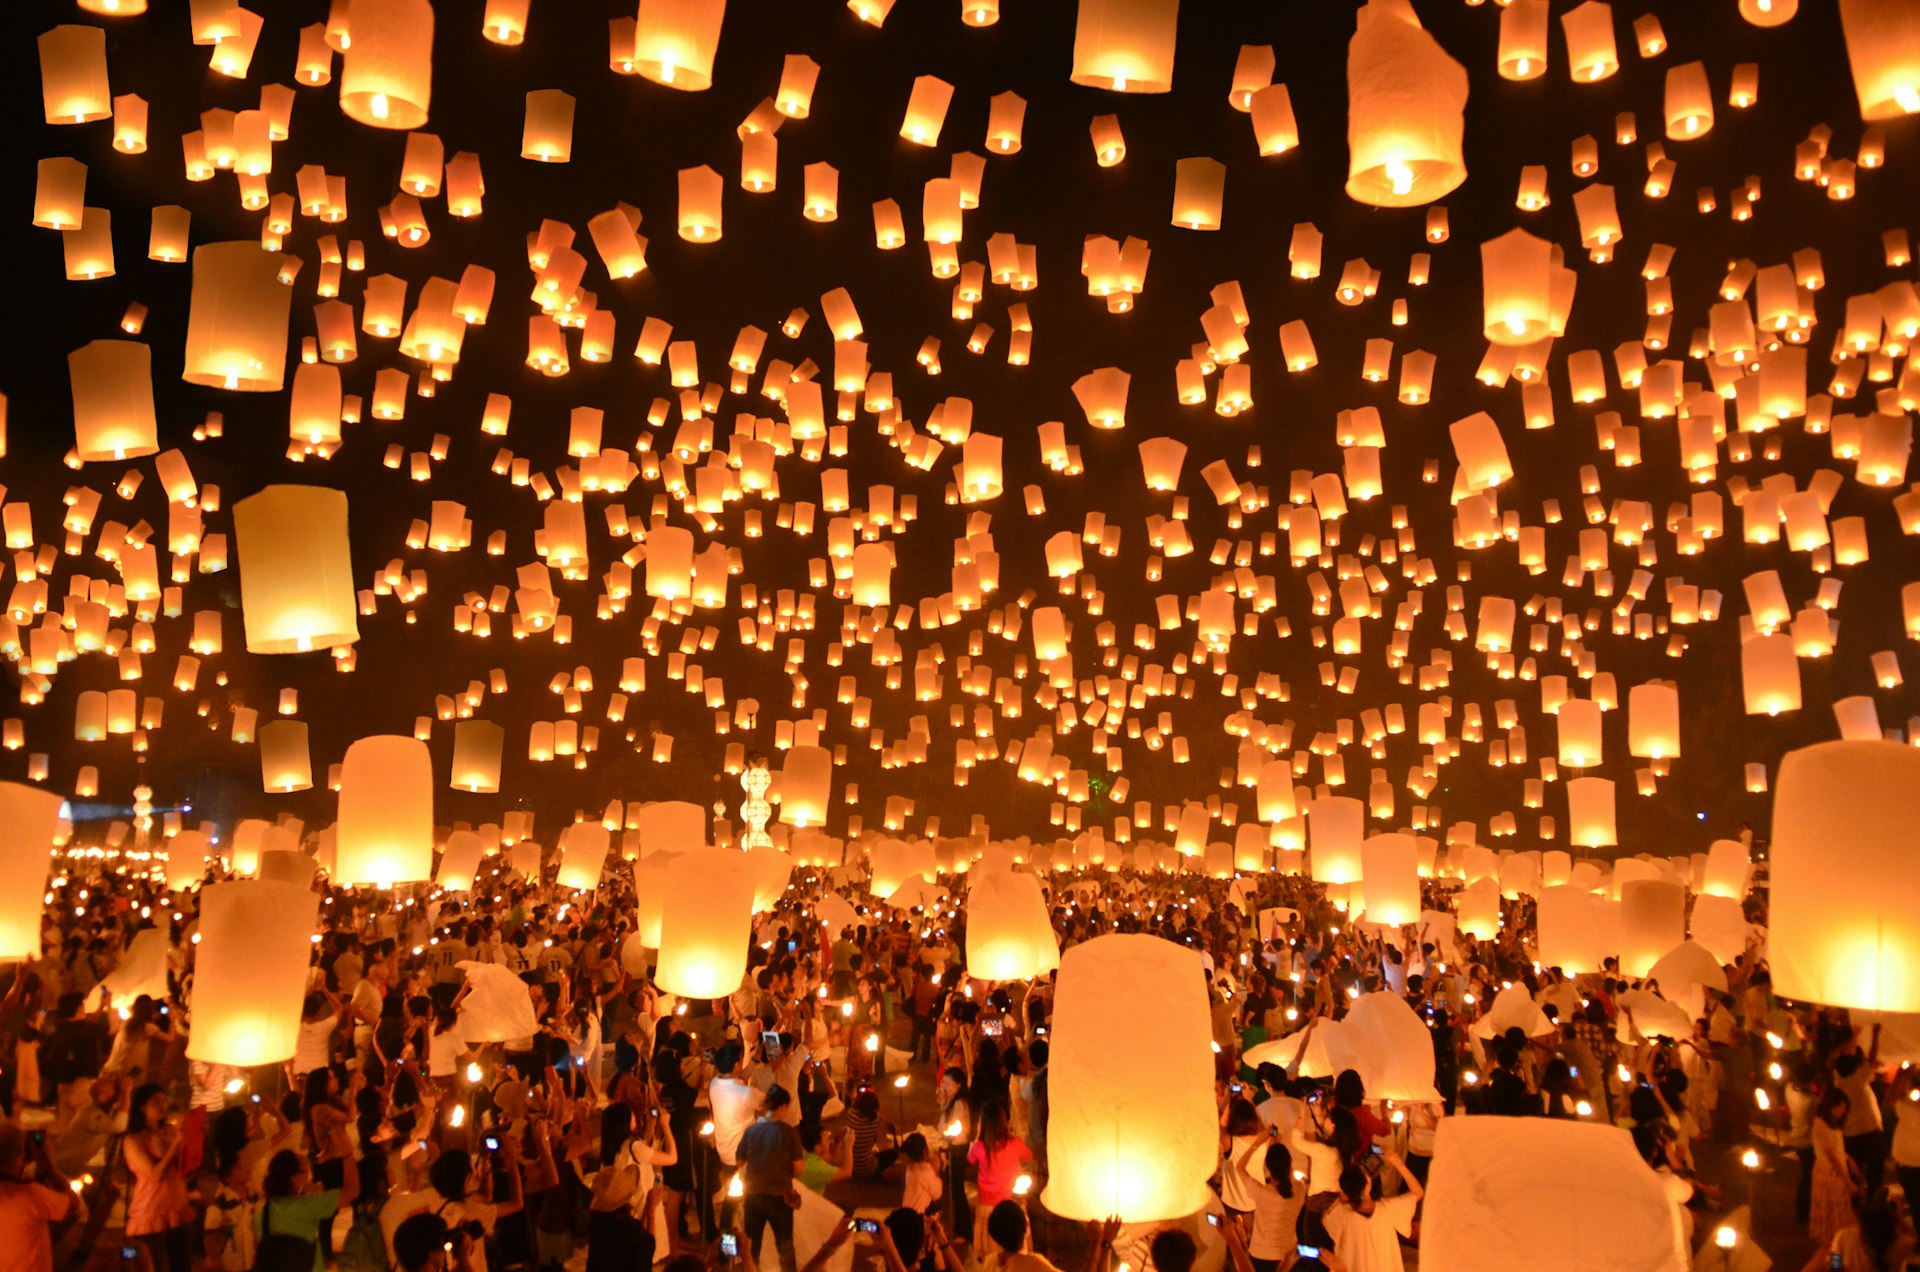 Scores of lit lanterns float in the dark skies of Thailand as part of the Loi Krathong festival 